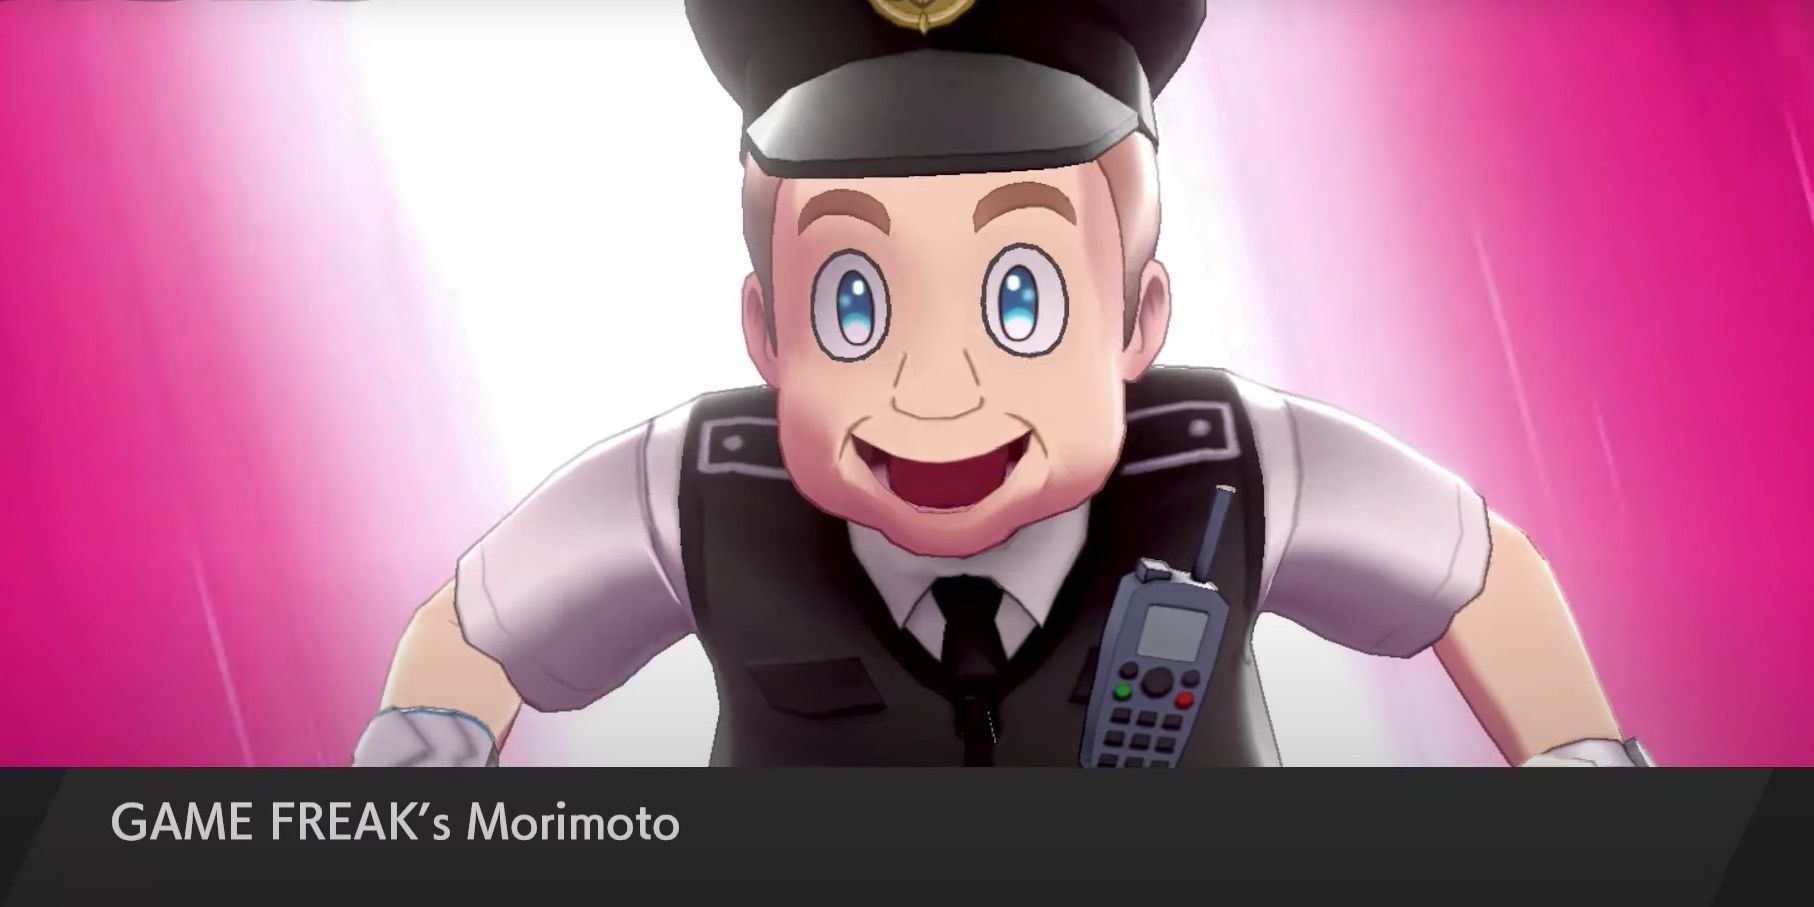 Morimoto as a police officer who's ready for battle